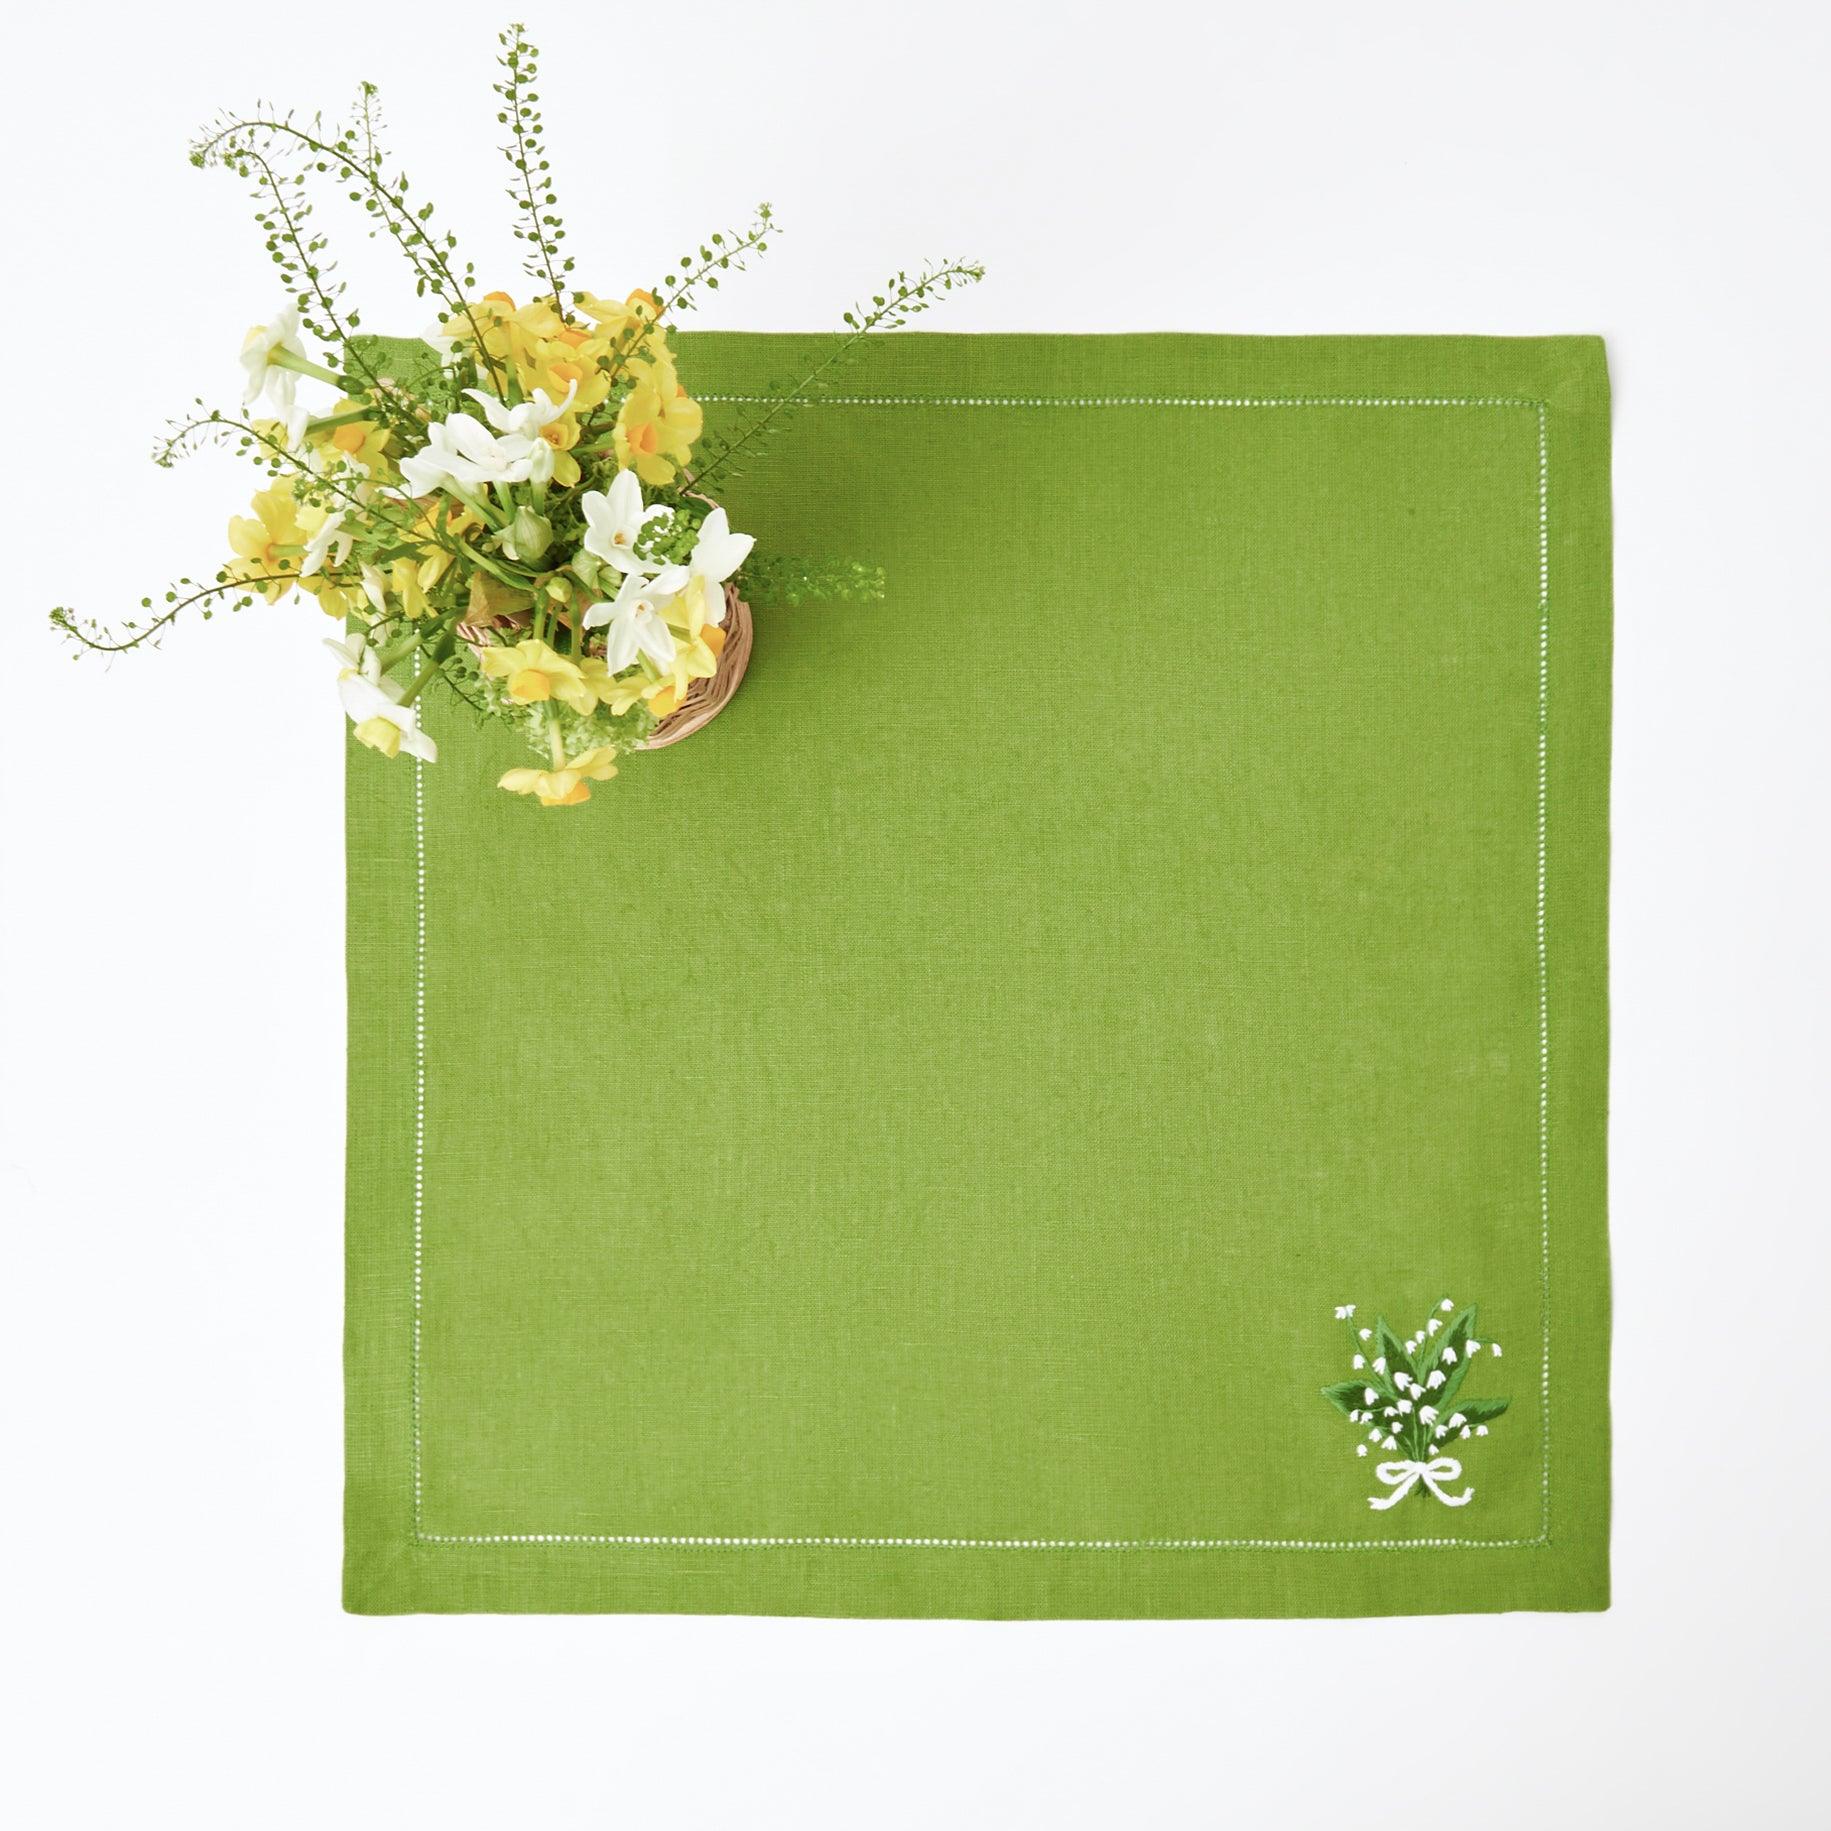 Green Lily Napinks Placemats Set of 4 6 8, Washable Art Print